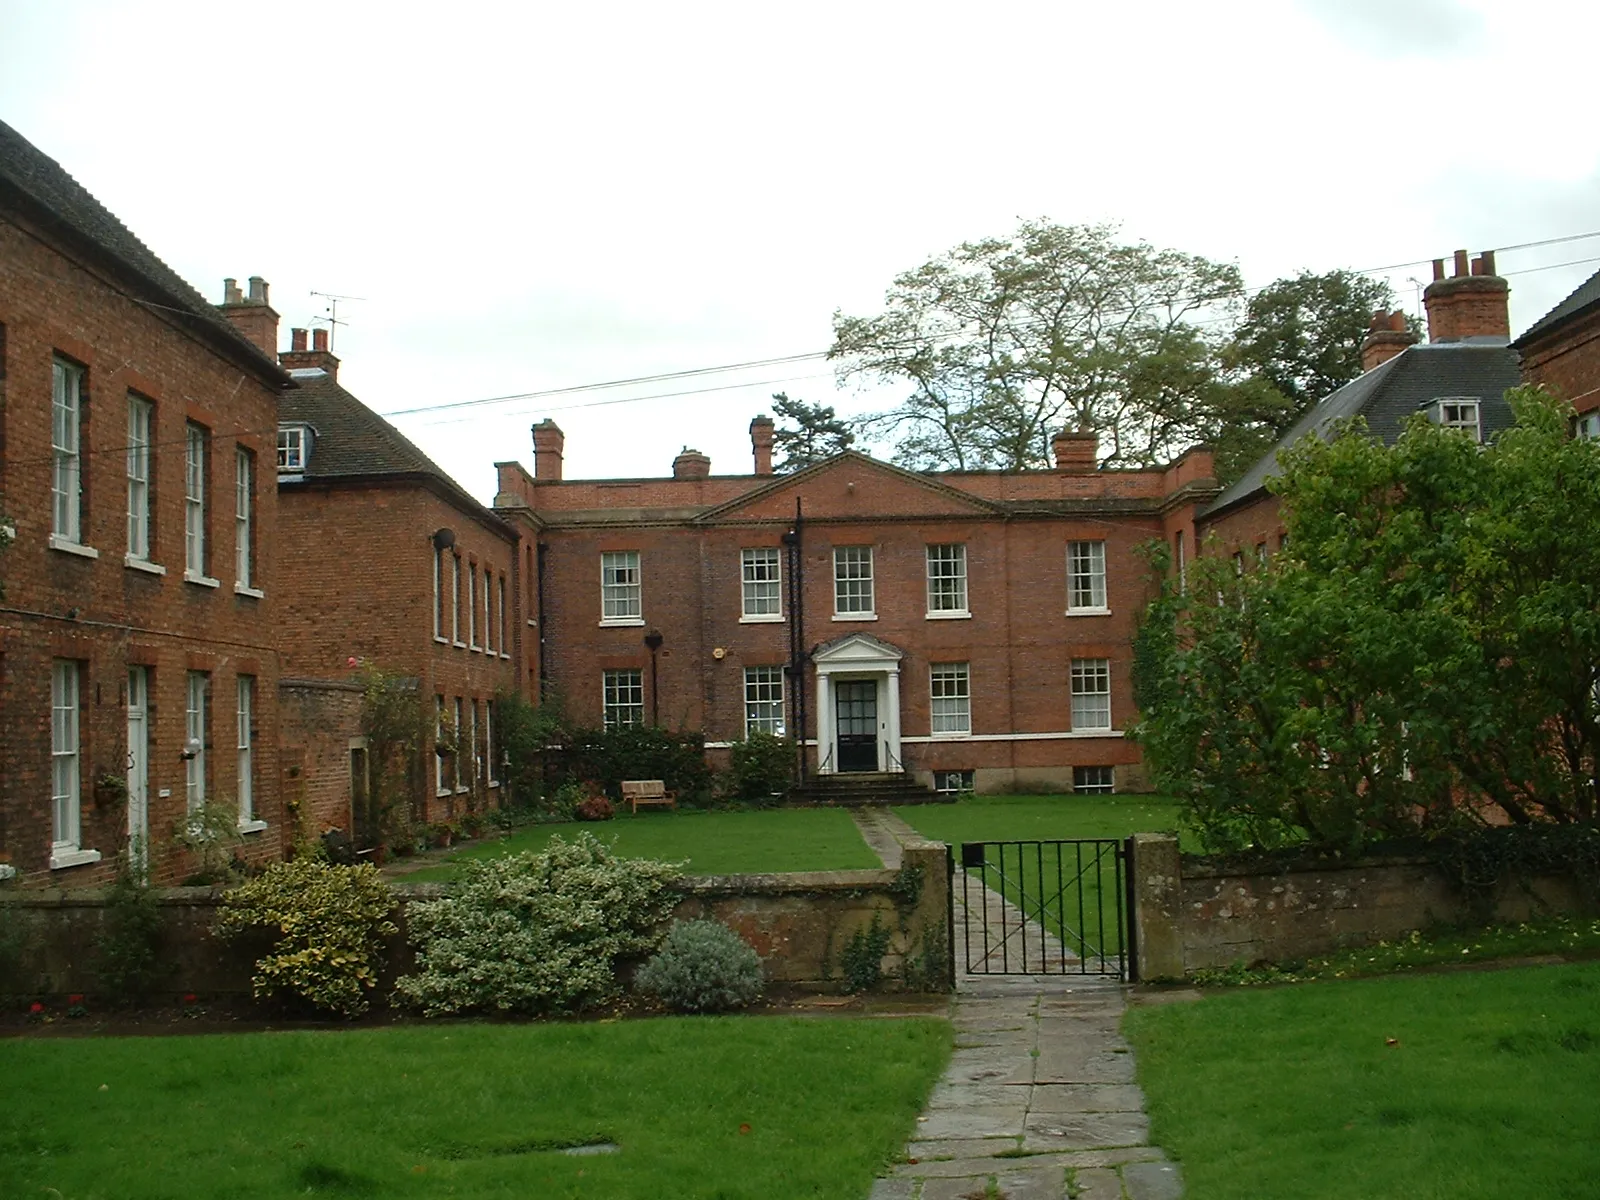 Photo showing: Vicars' Court and the Residence (at the far end), Southwell. These are the residences of the clergy who serve Southwell Minster. Taken by Necrothesp, 25 October 2005.